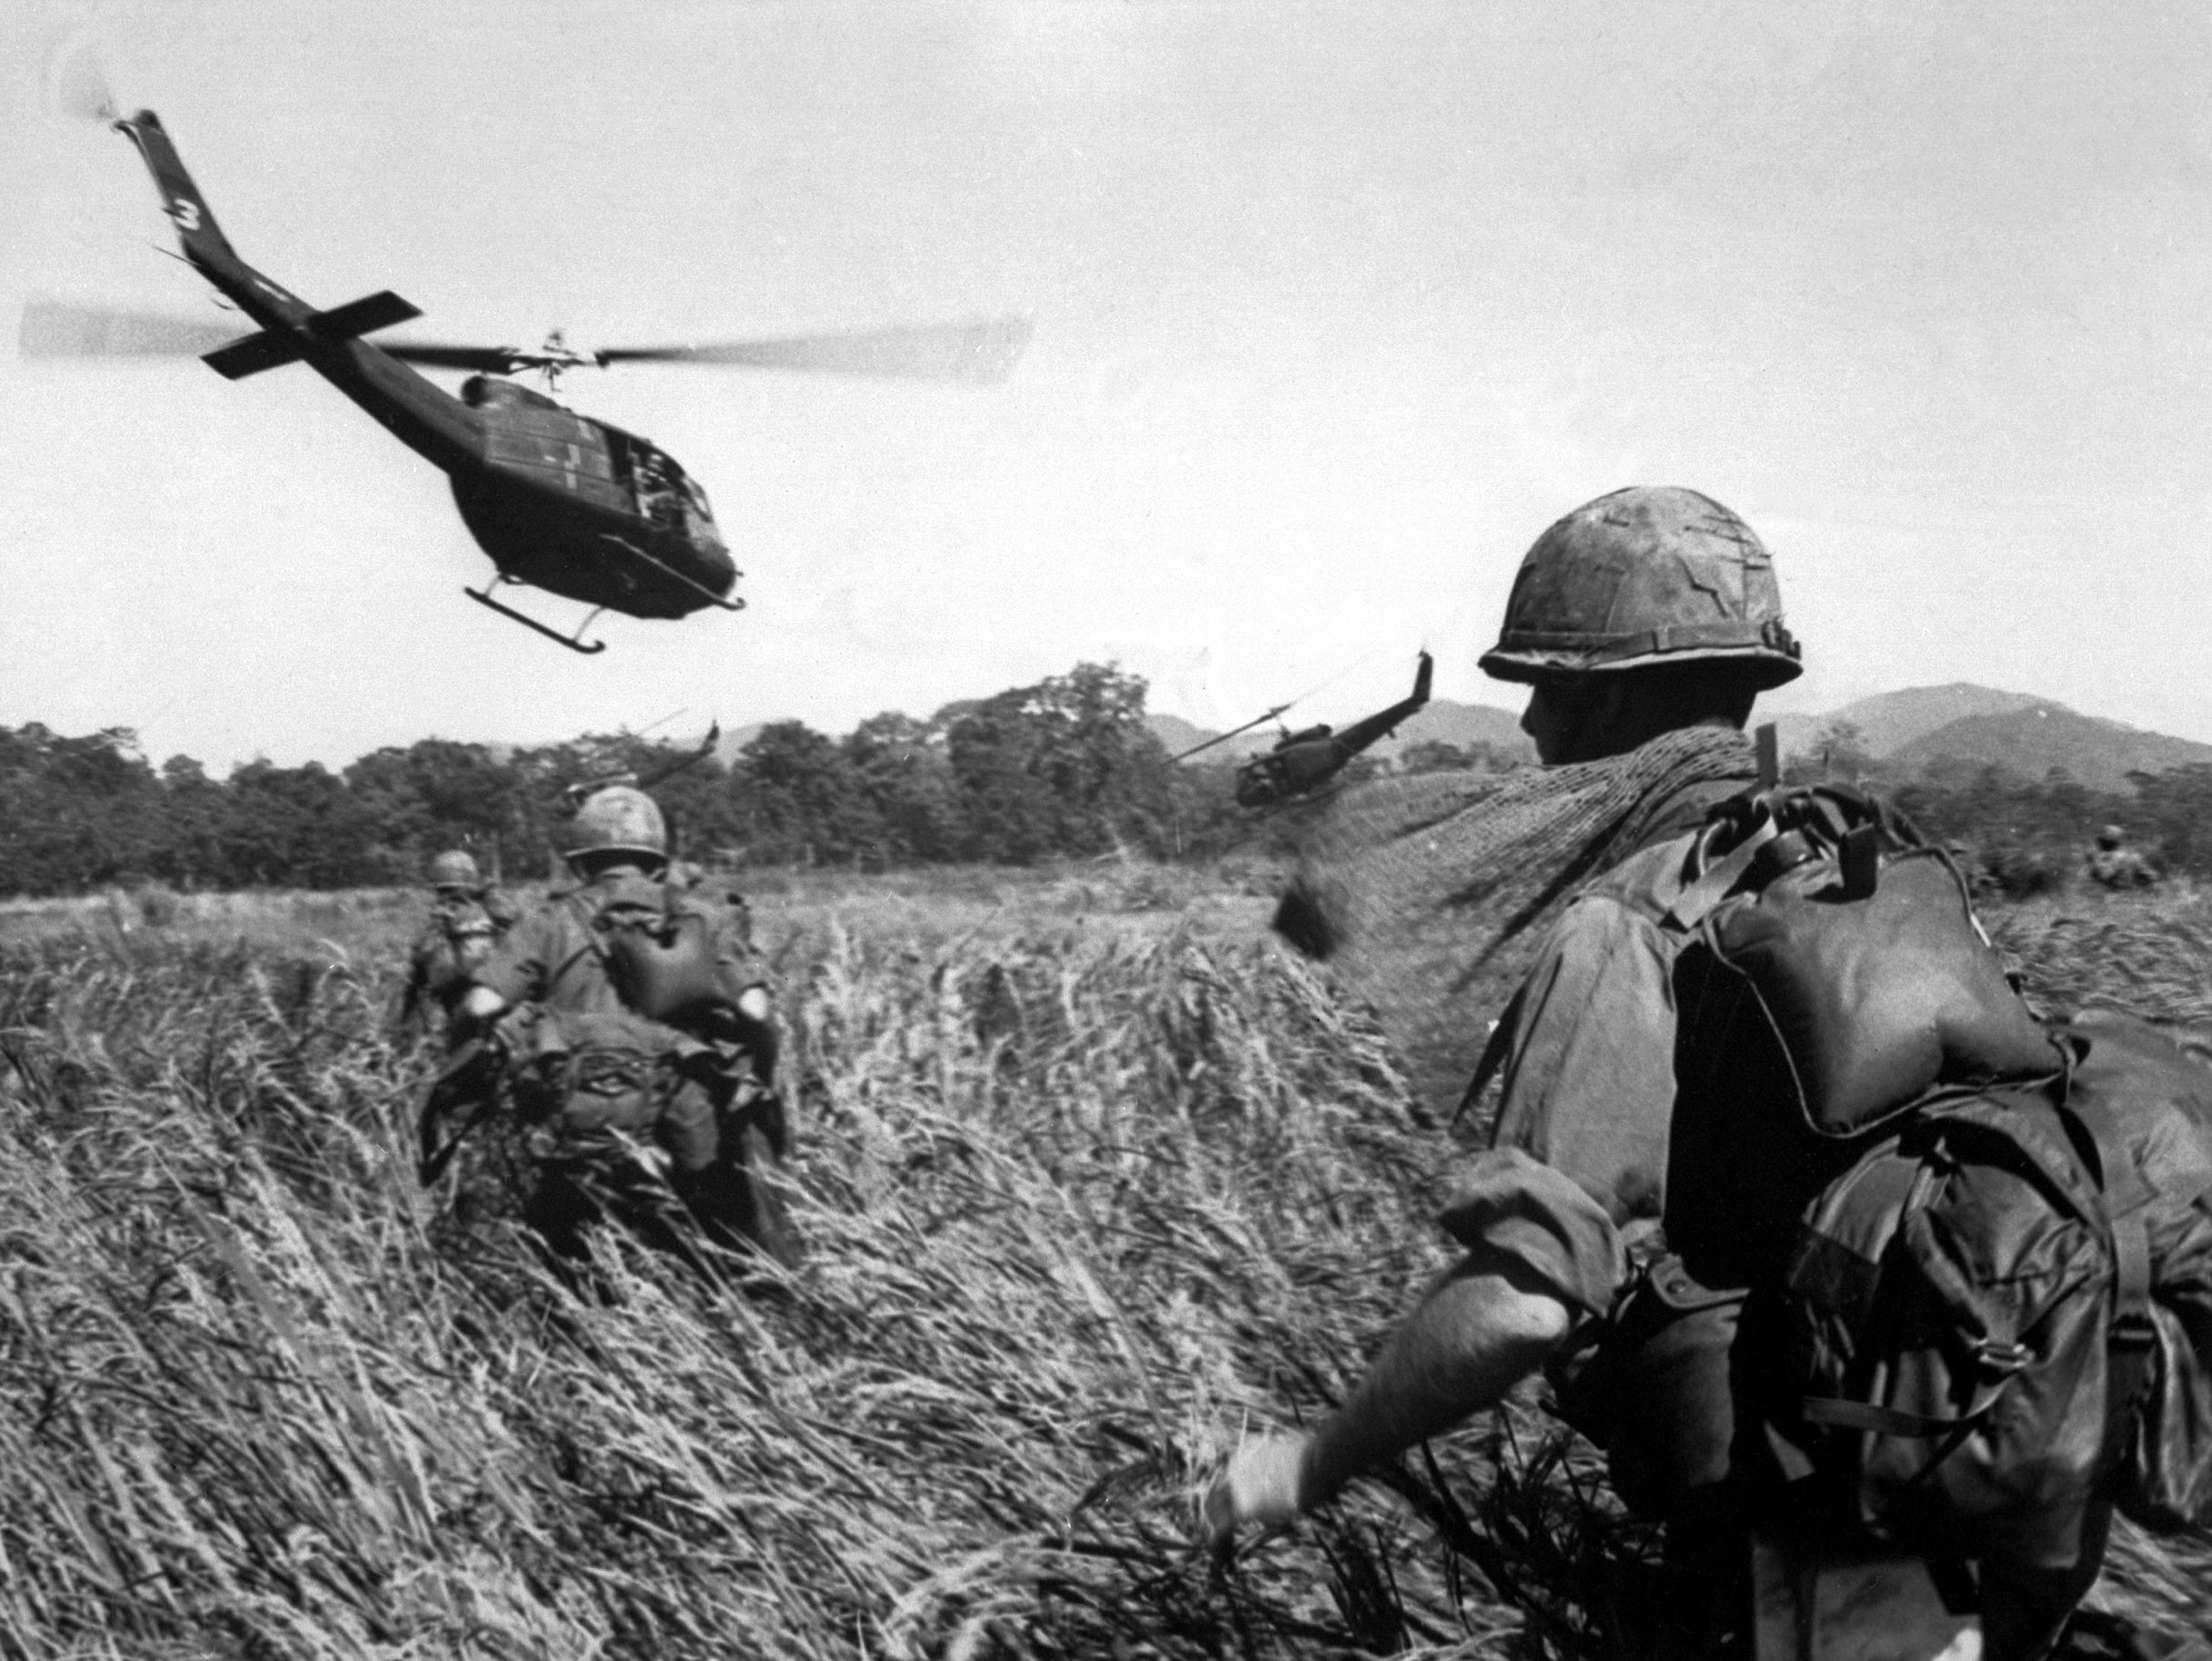 US soldiers are evacuated from a Vietcong position in December 1965